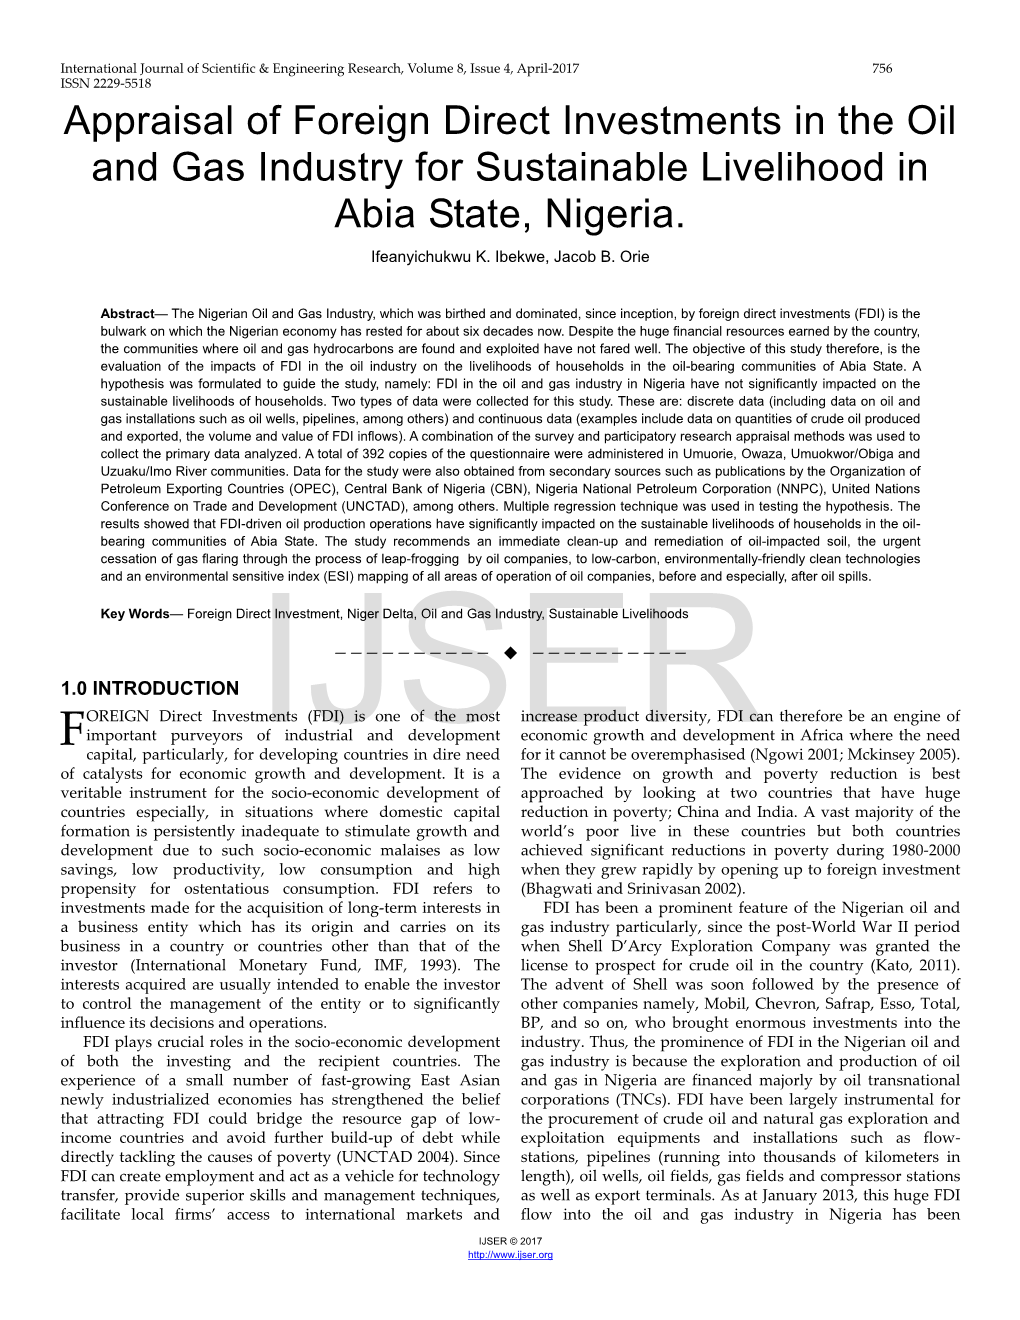 Appraisal of Foreign Direct Investments in the Oil and Gas Industry for Sustainable Livelihood in Abia State, Nigeria